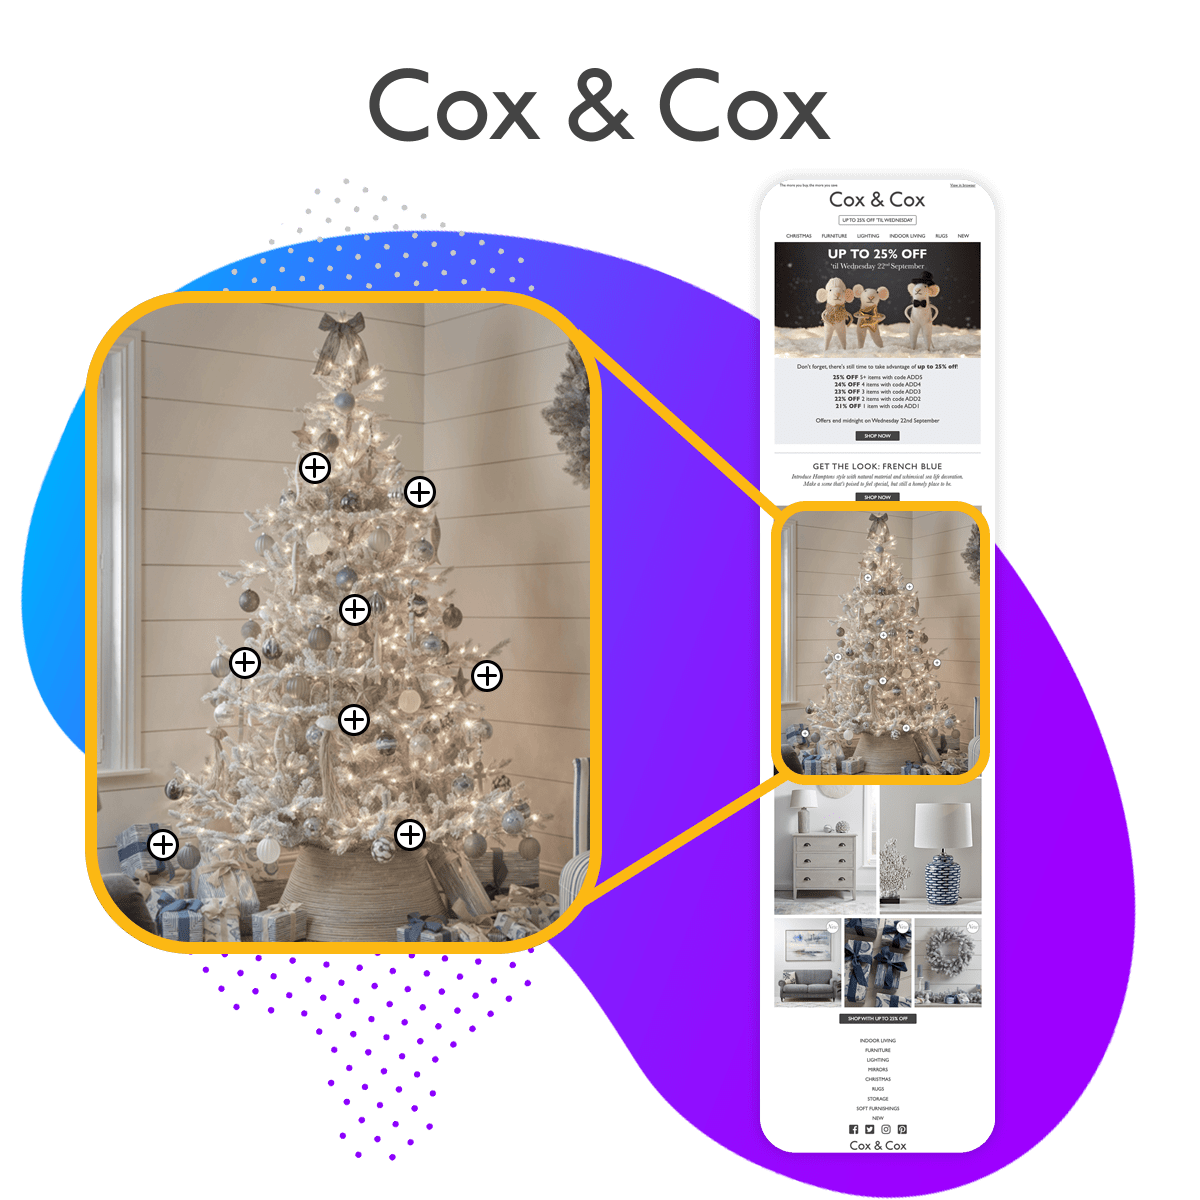 Cox and cox feature image